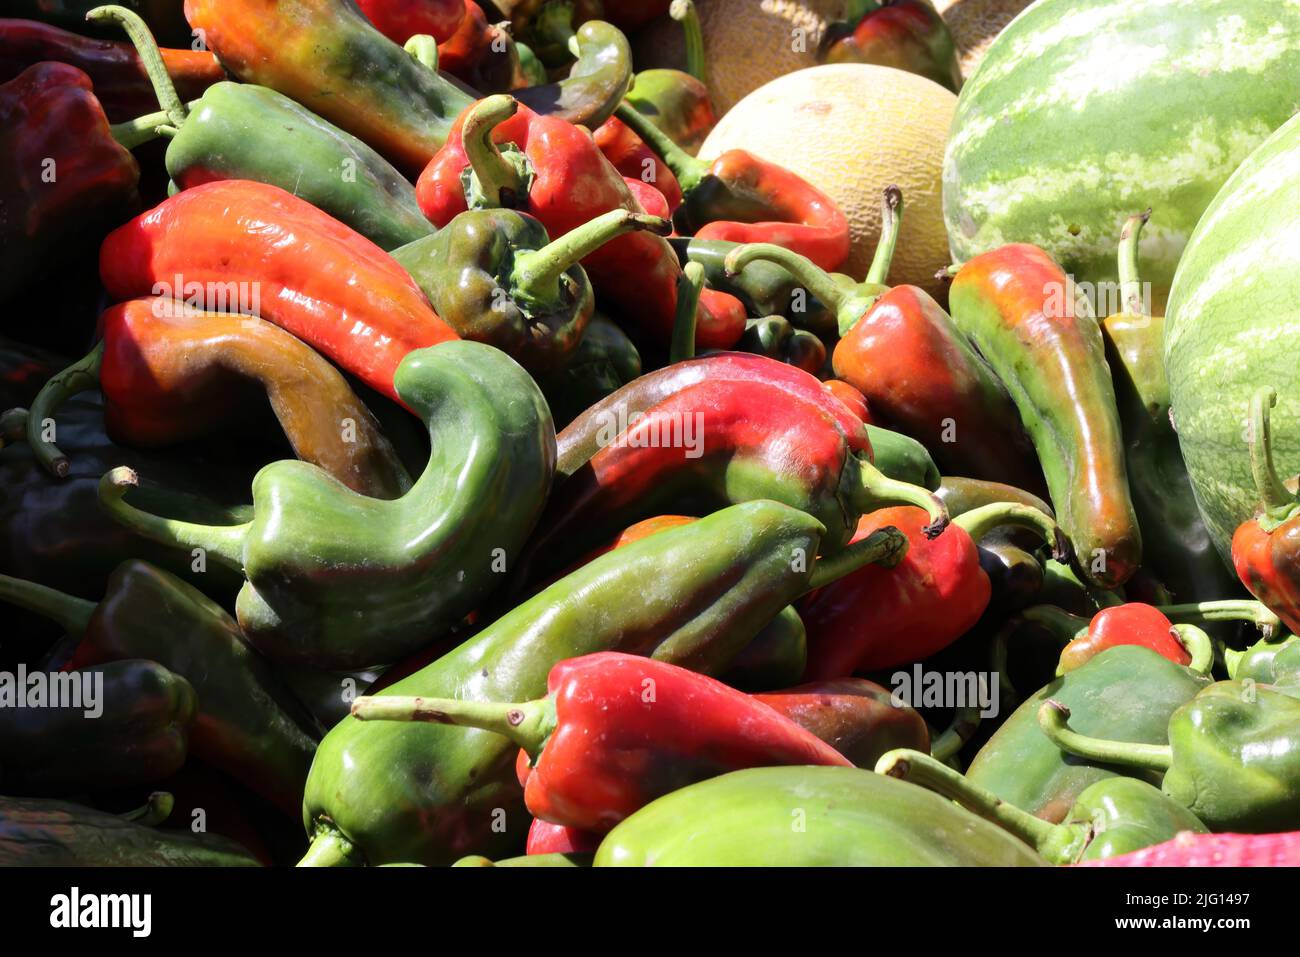 Chilli peppers on market stall Osa Peninsula, Costa Rica                     March Stock Photo